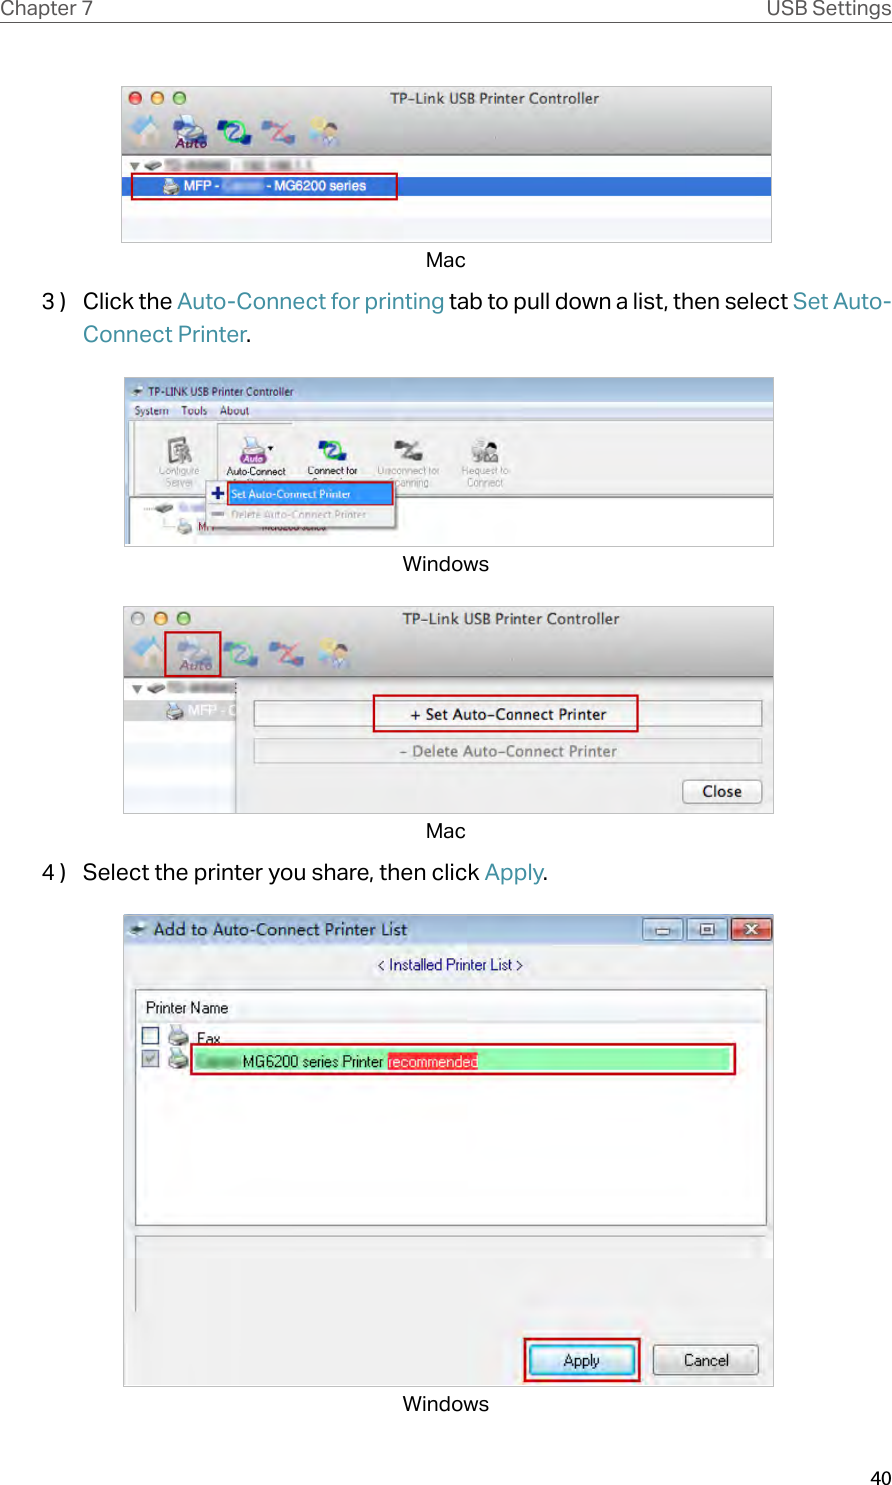 40Chapter 7 USB SettingsMac3 )  Click the Auto-Connect for printing tab to pull down a list, then select Set Auto-Connect Printer. Windows Mac4 )  Select the printer you share, then click Apply. Windows